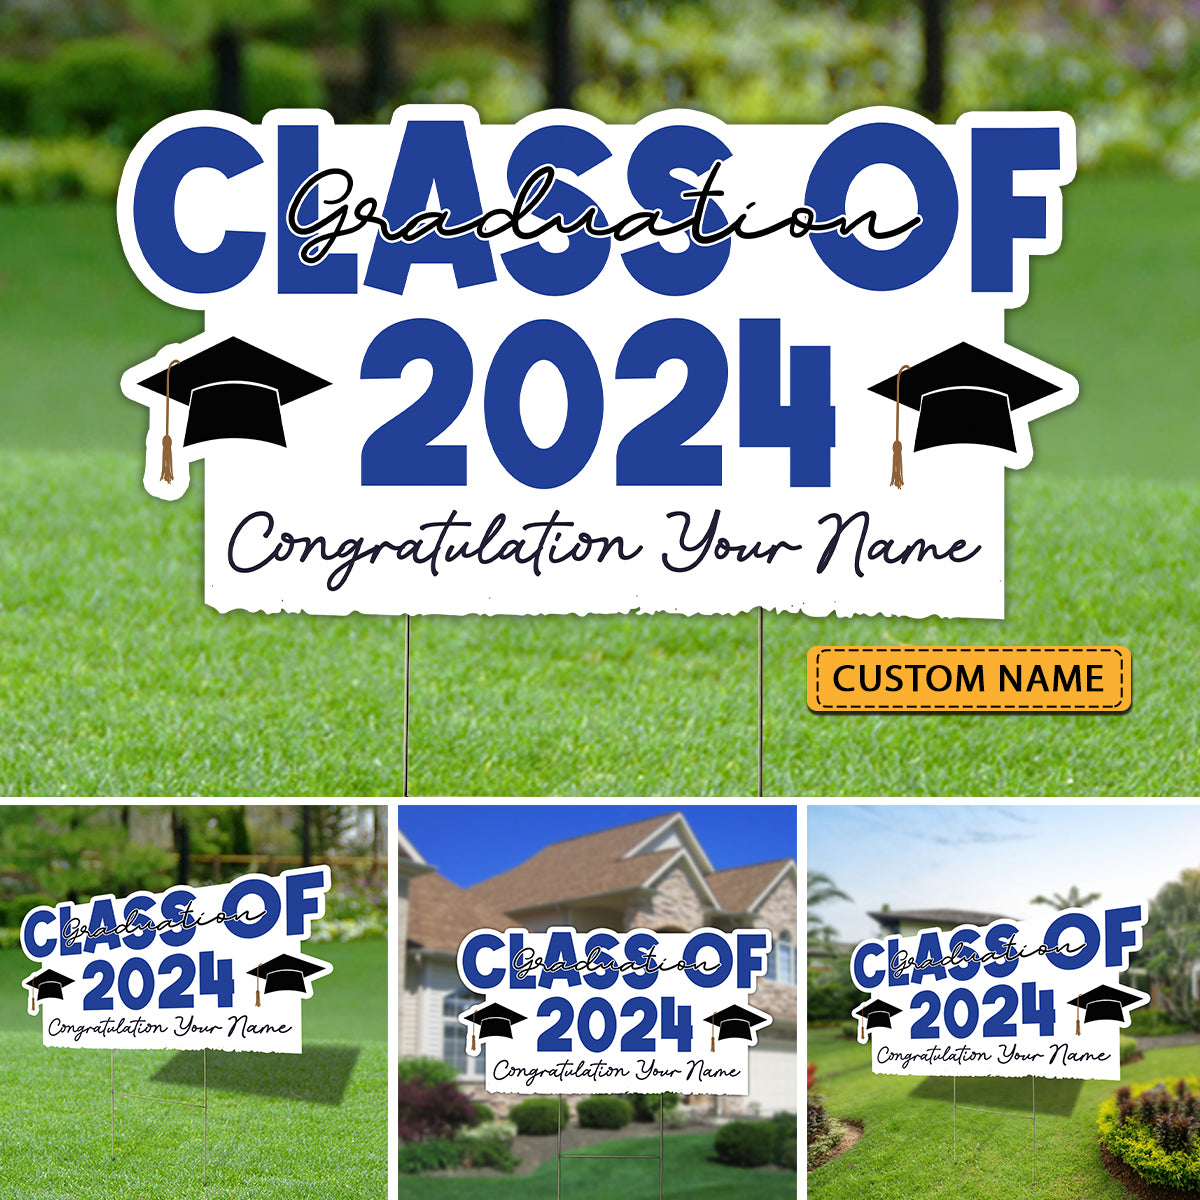 Class Of 2024 Congratulations, Custom Your Name, Personalized Lawn Sign, Yard Sign, Gift For Graduation